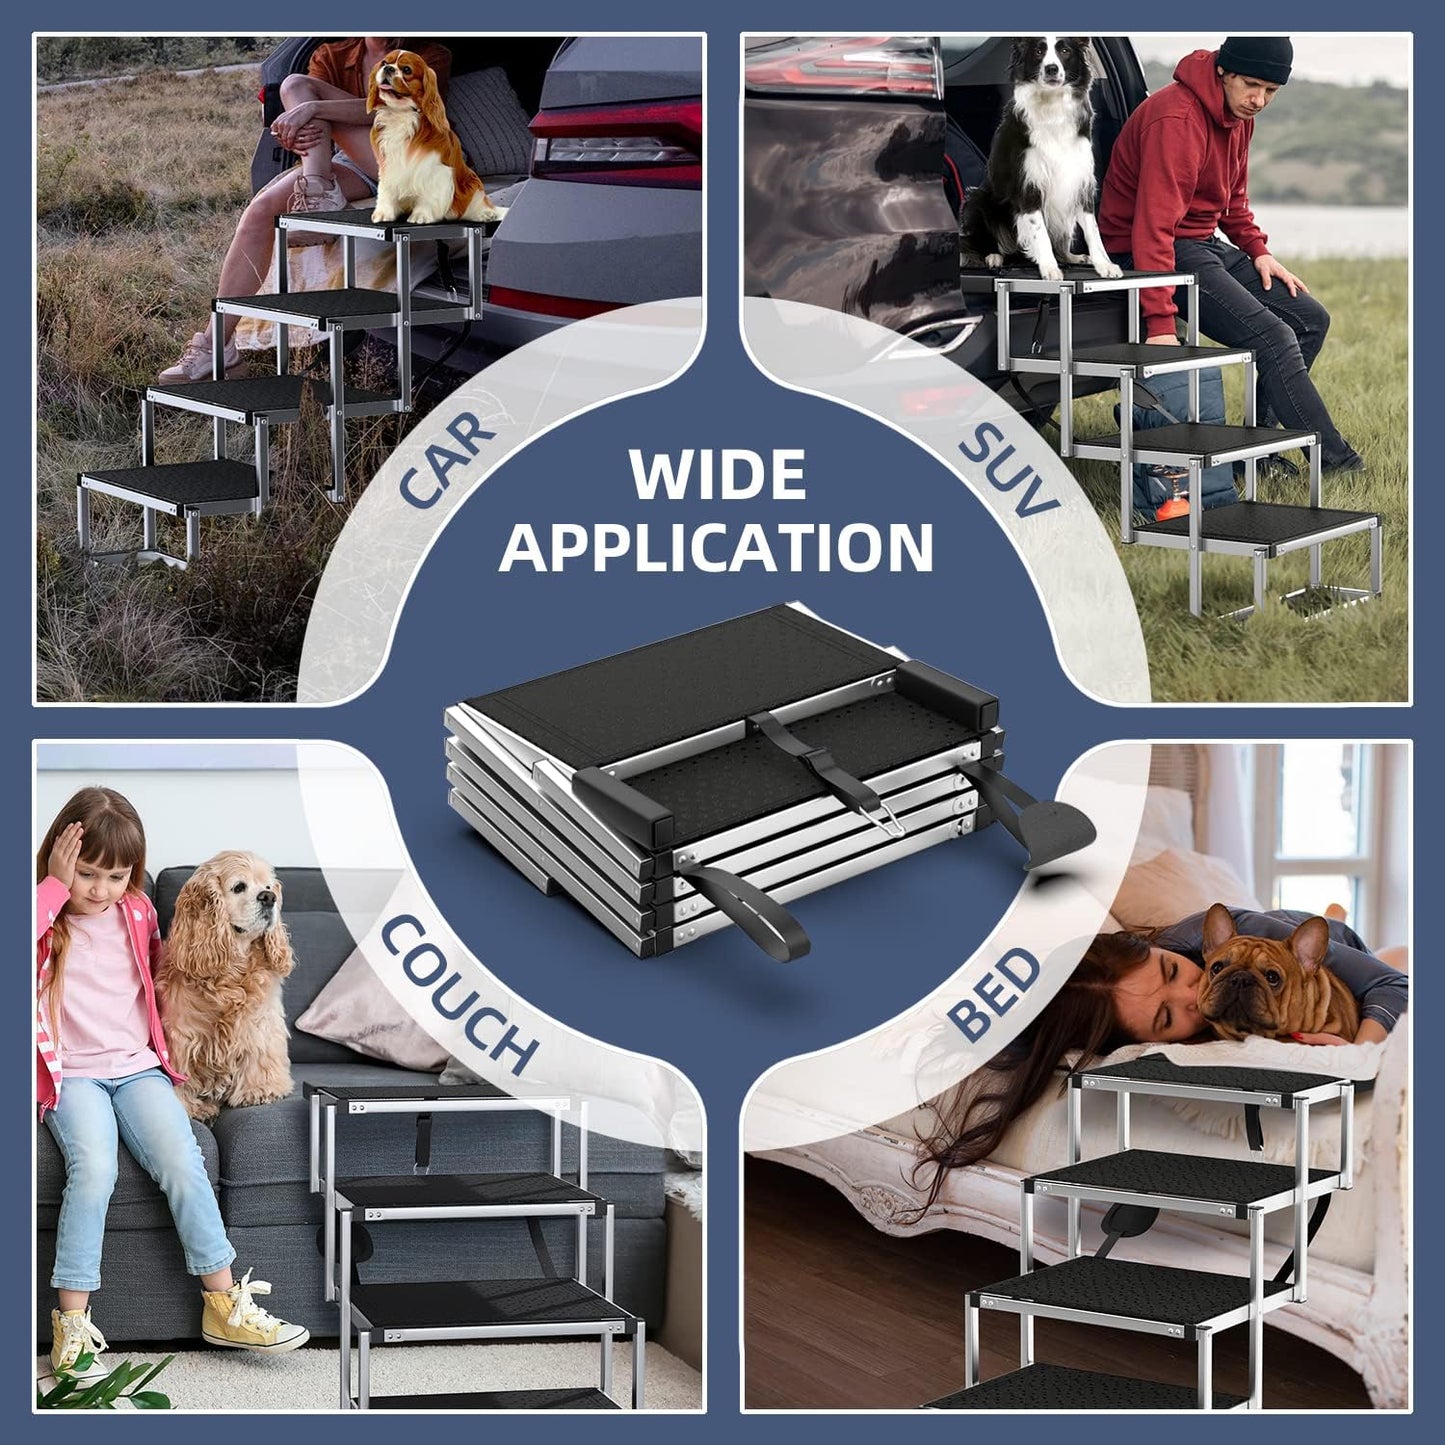 Supports up to 250 lbs Extra Wide Dog Ramps for Large Dogs